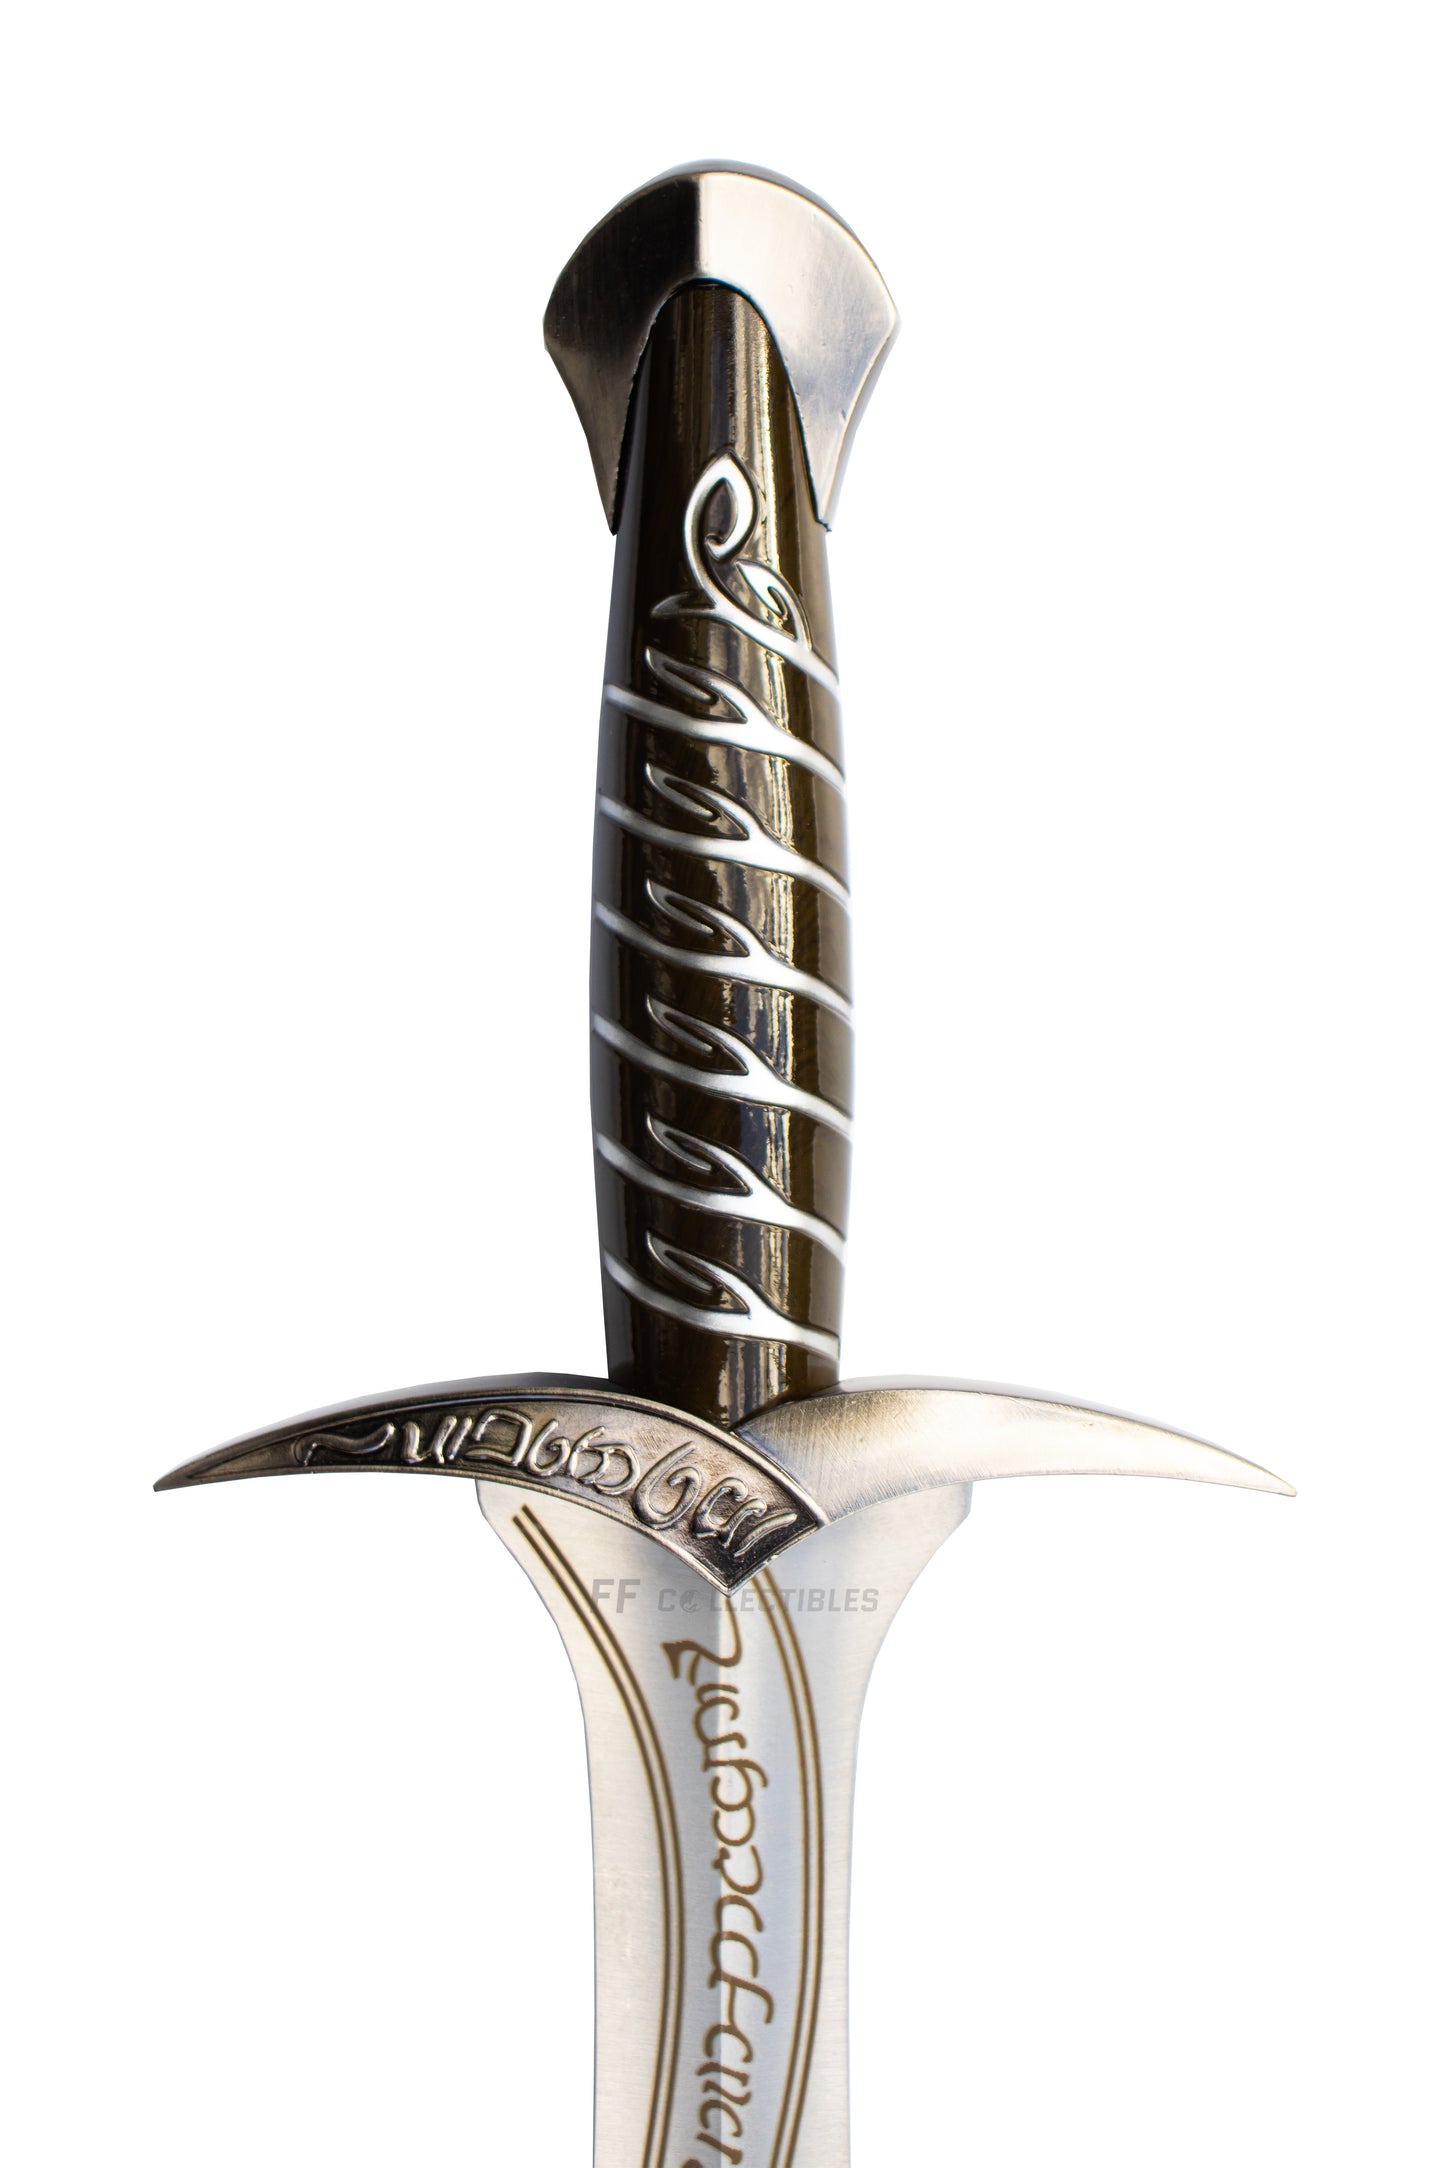 LORD OF THE RINGS - STING, SWORD OF BILBO AND FRODO BAGGINS (w FREE wall plaque)